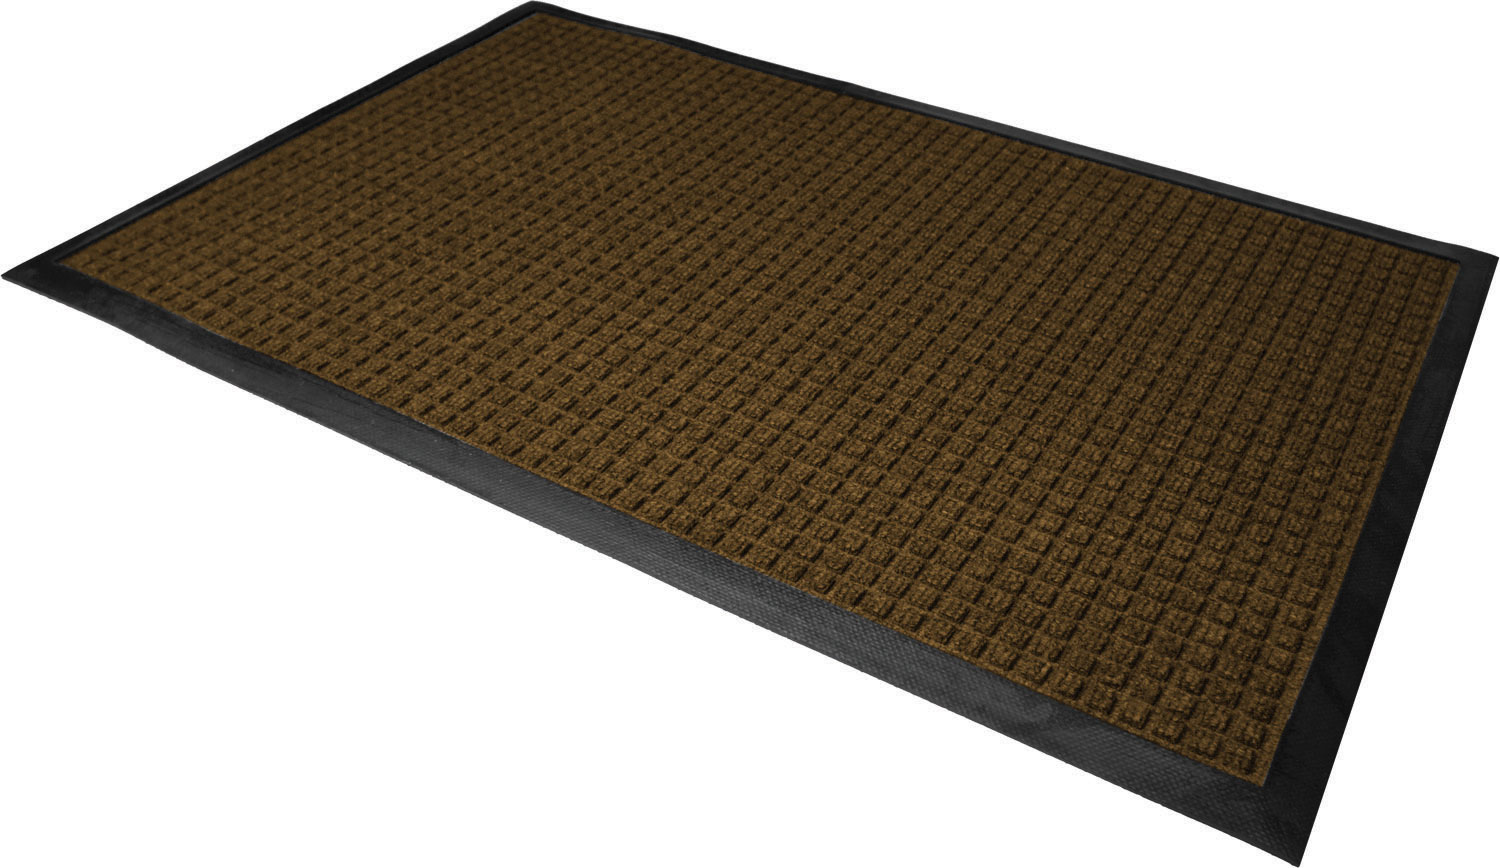 Used  *Free Ship Floor Mat Heavy Duty Commercial Indoor Outdoor  Entrance Mat 